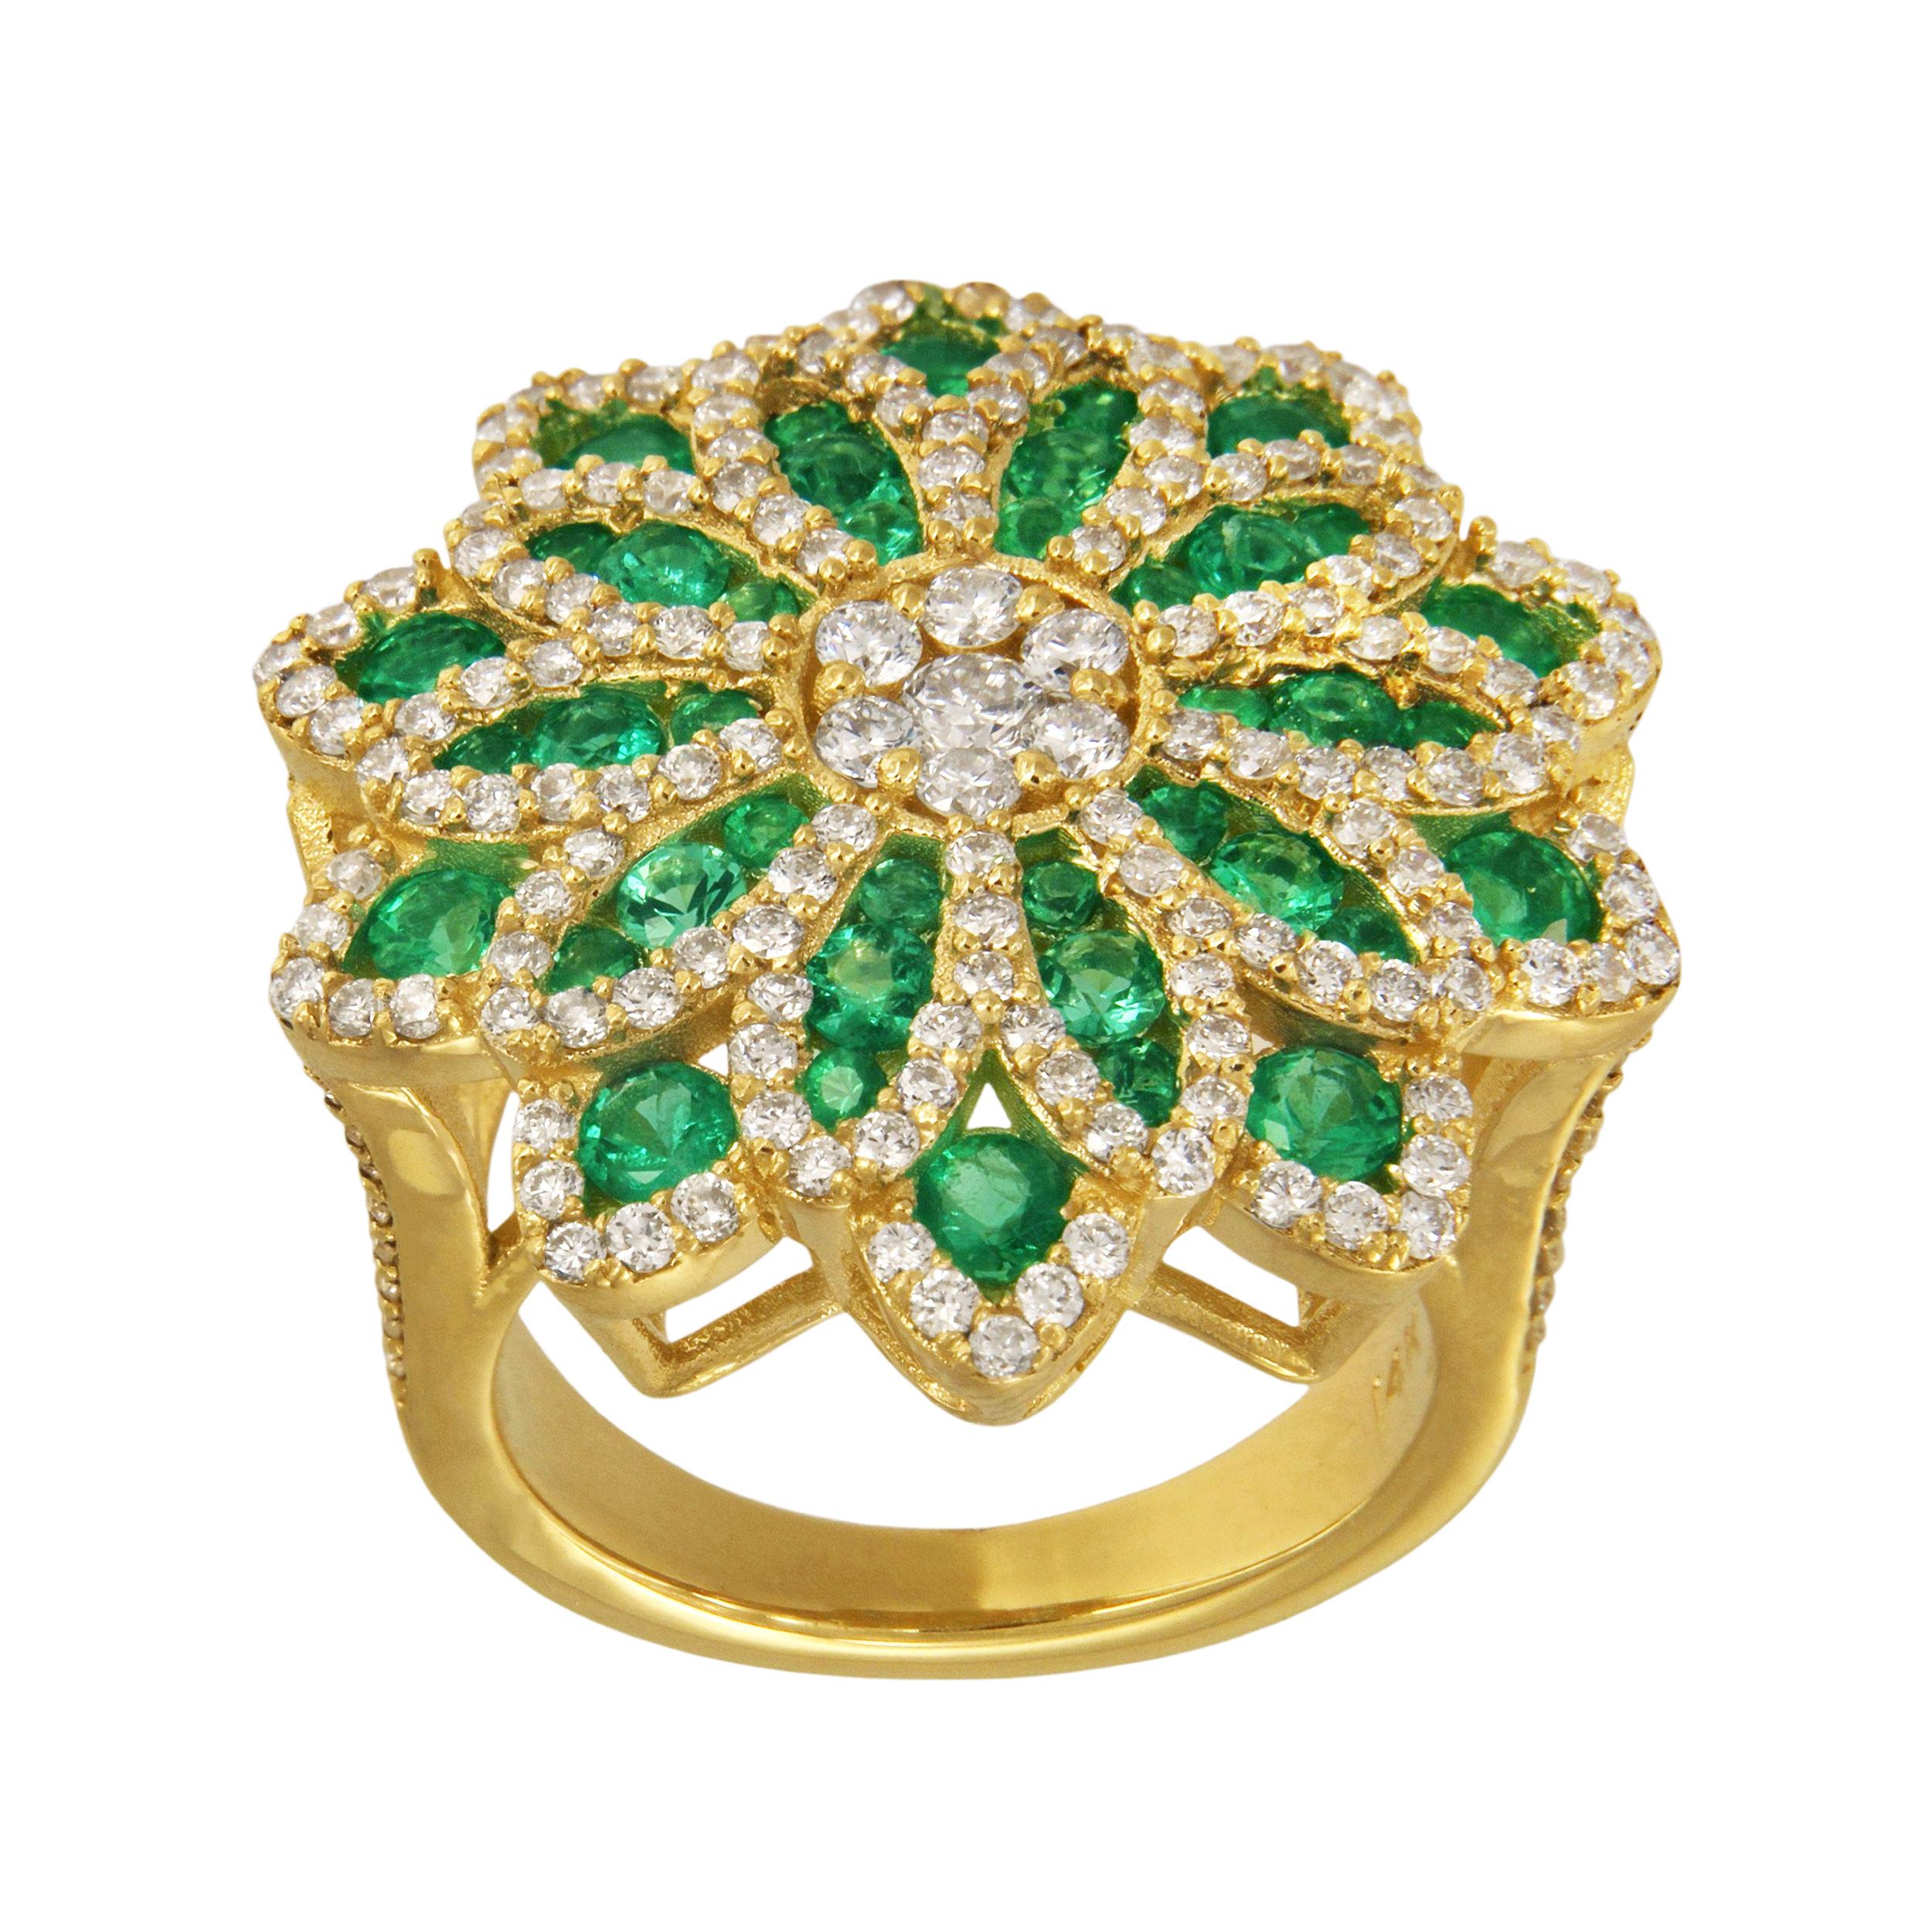 This gorgeous 14 karat yellow gold ring is everything you wanted from a piece of jewelry. This is a ring that fully embraces creativity and opulence, with its columbian emeralds that really give it a distinctive character. 
-Custom Made
-14k Yellow